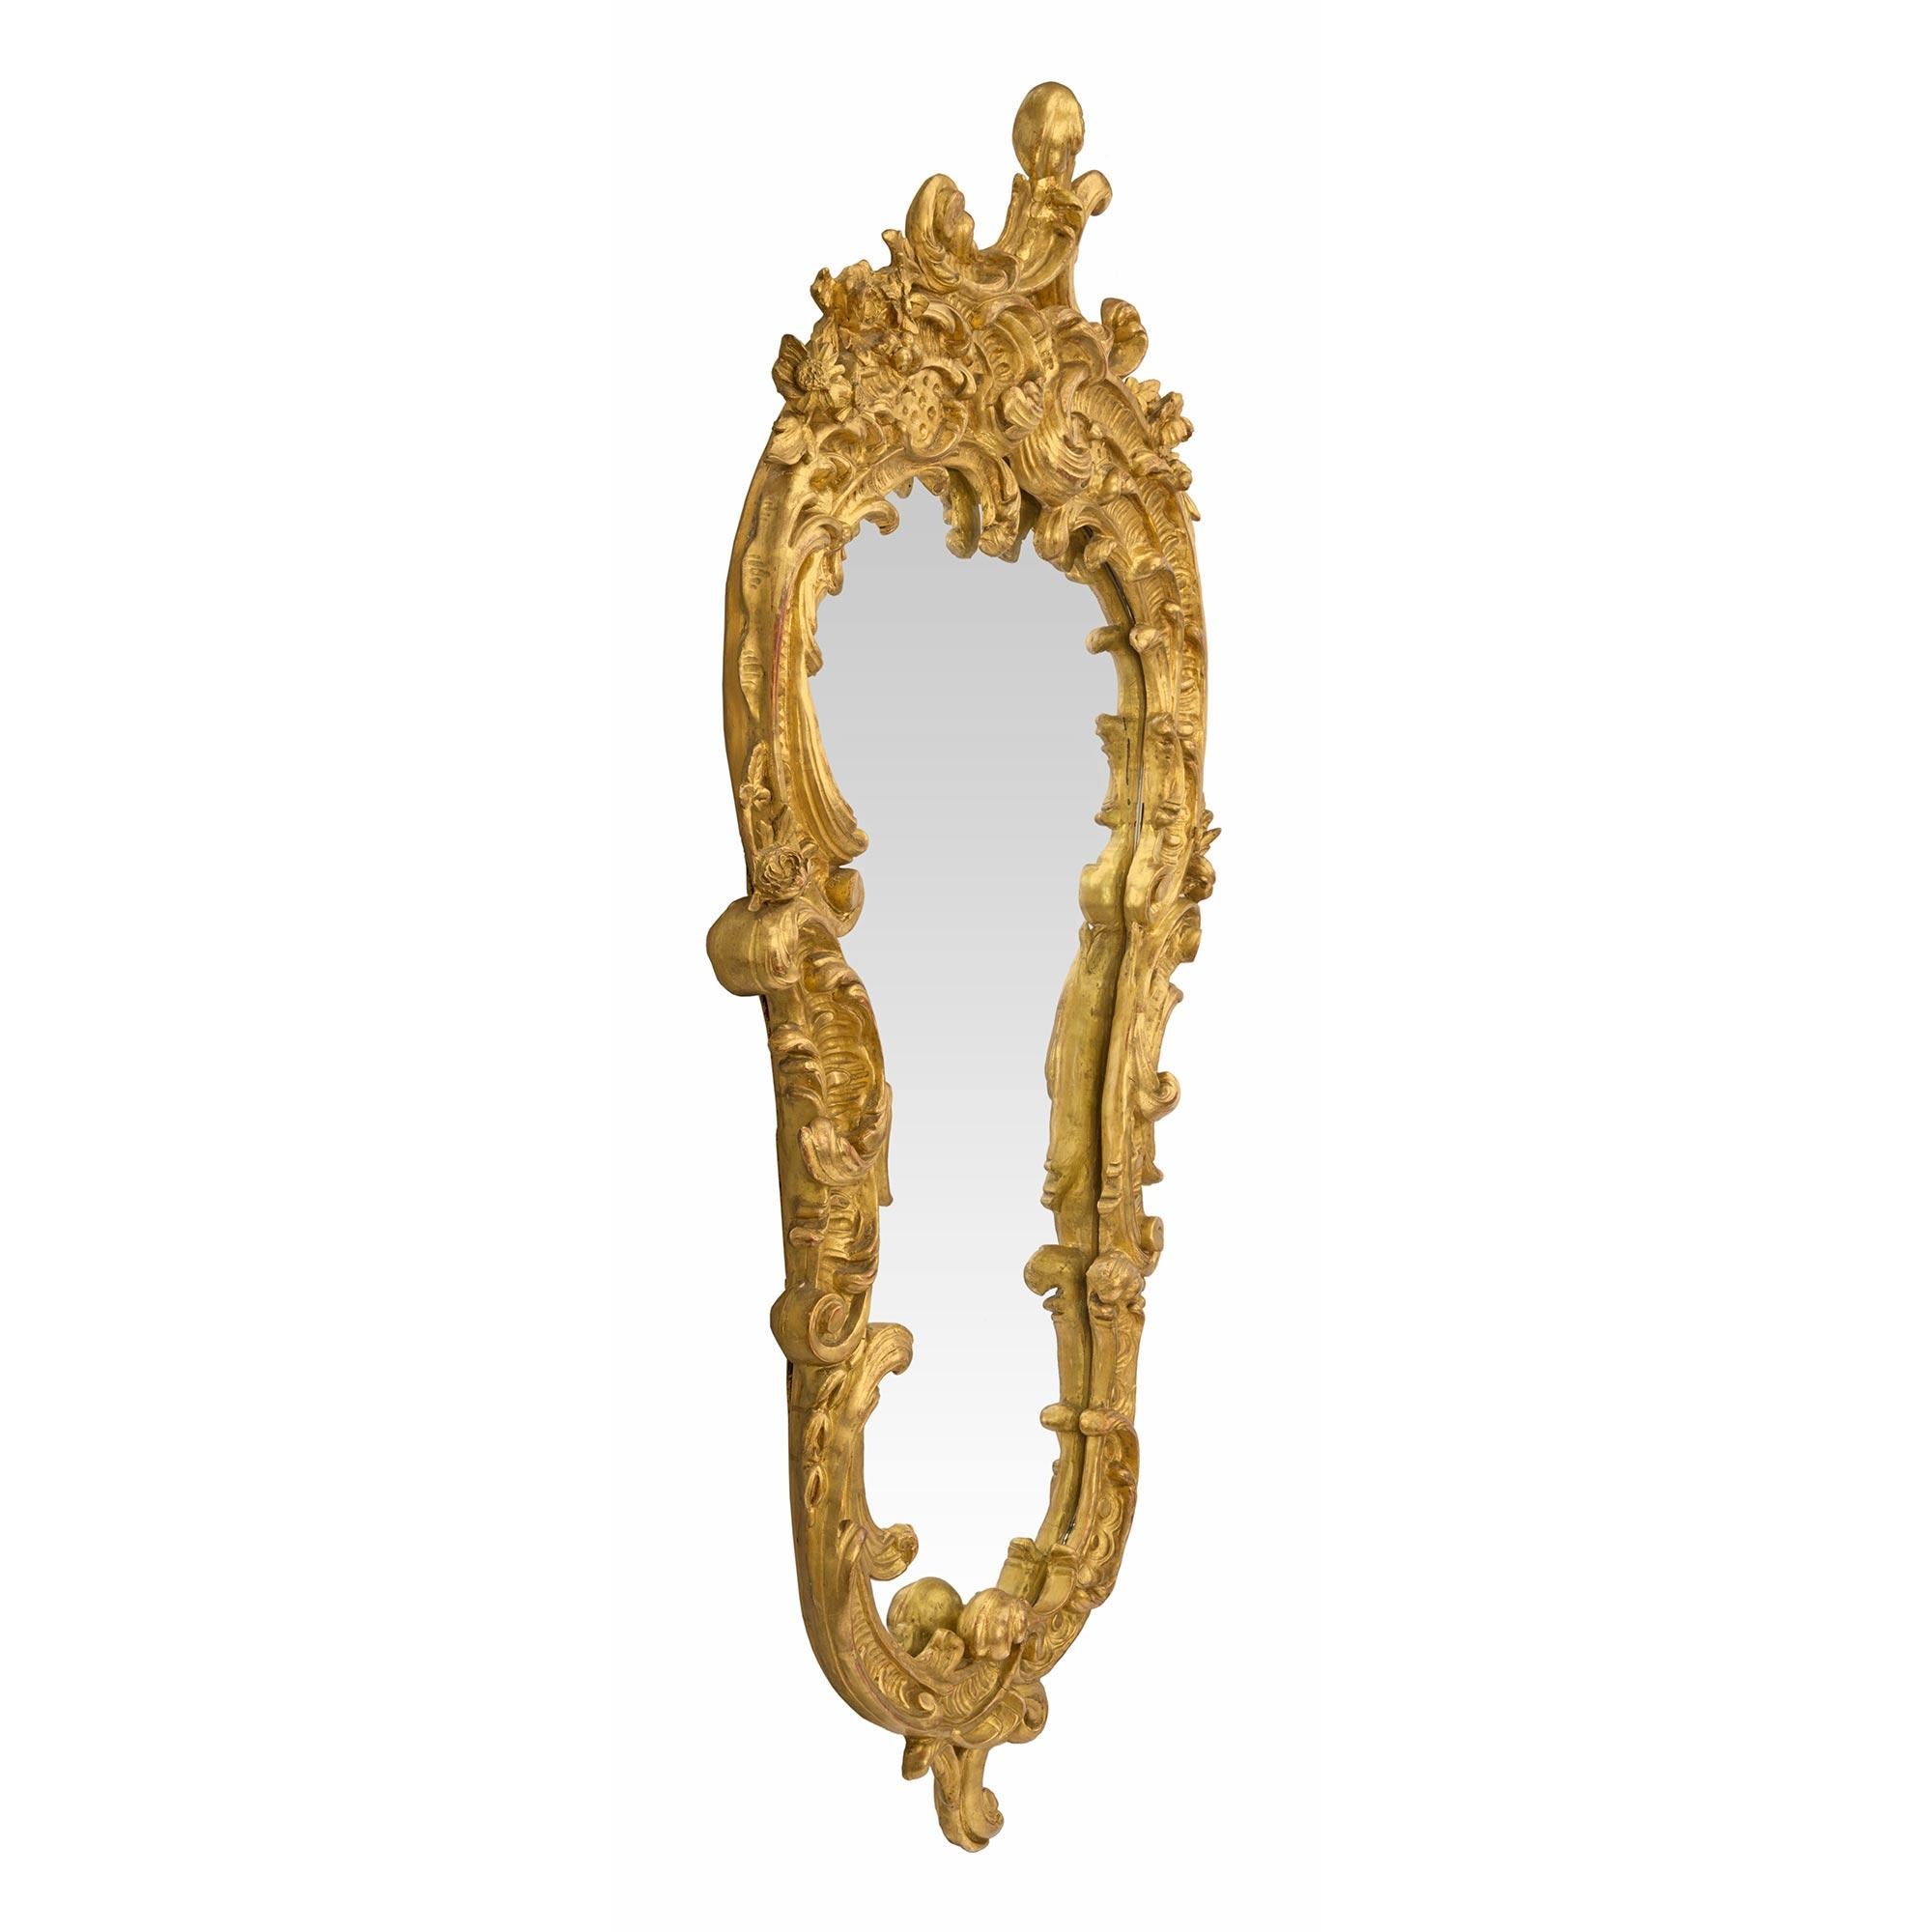 A beautiful French mid 19th century Louis XV st. giltwood mirror. The mirror plate is framed within a most decorative curvaceous giltwood border. At the base is a striking scrolled movement with elegant richly carved foliate designs. The designs